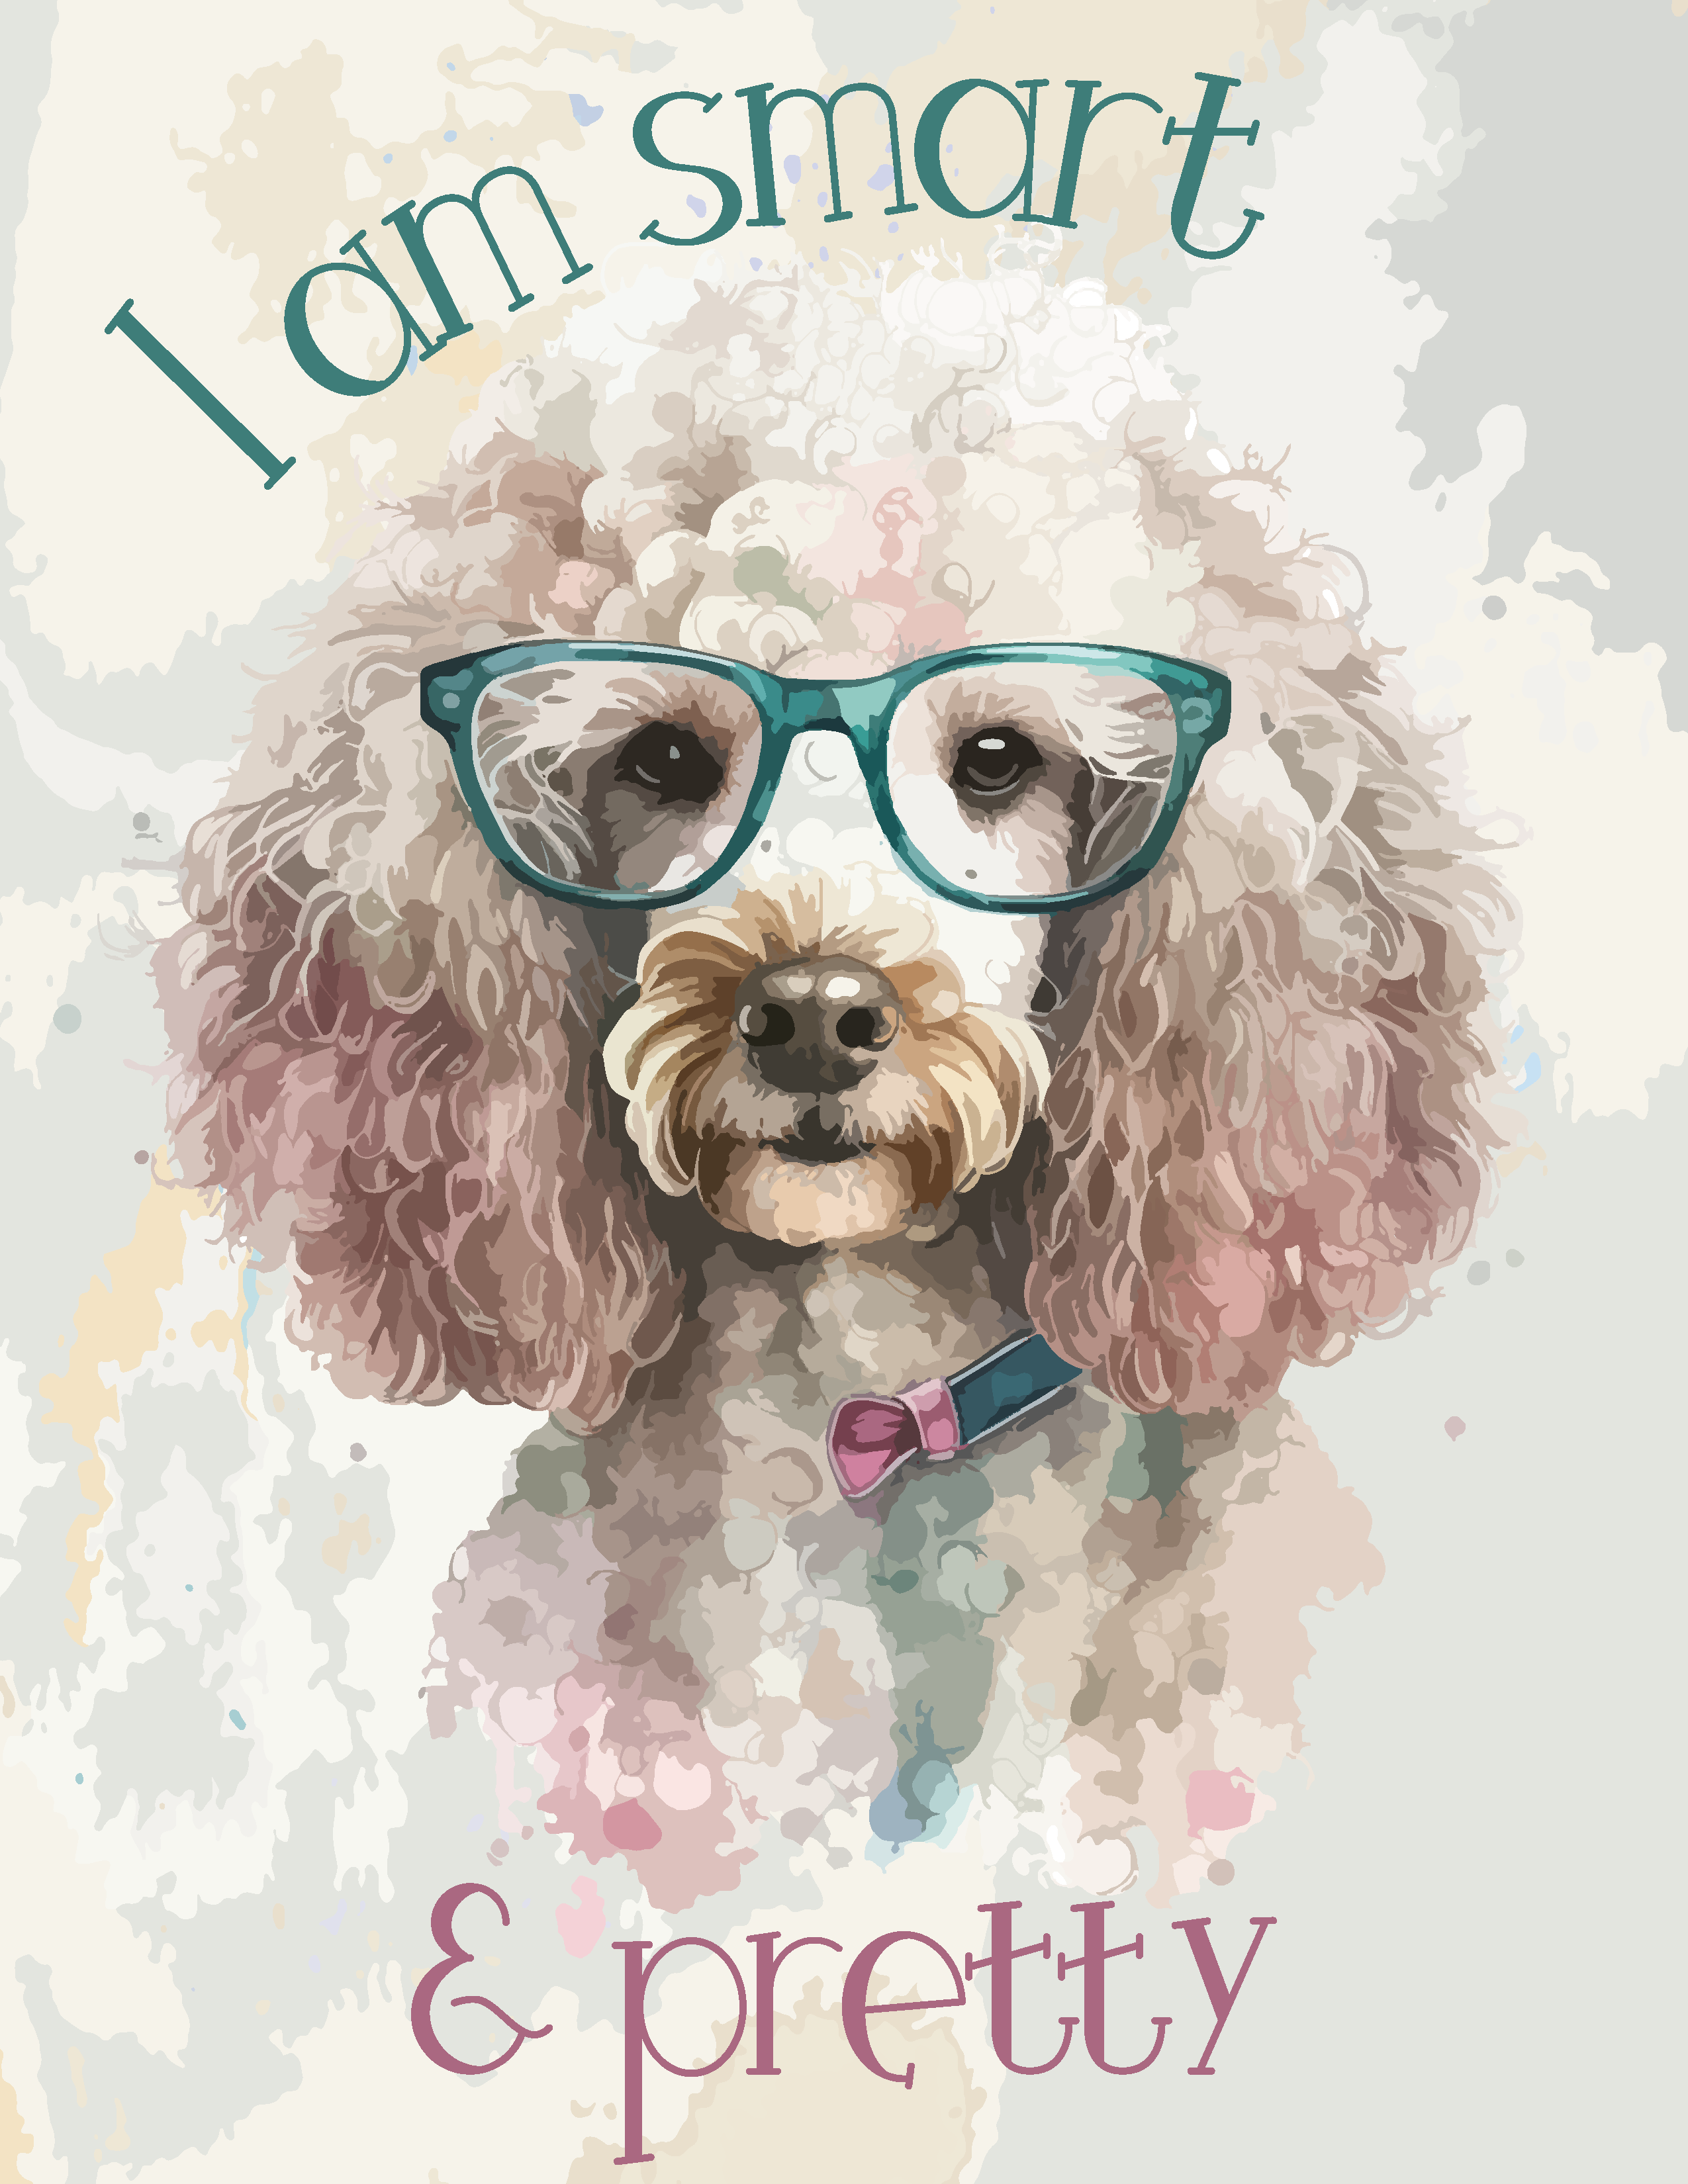 I Am Smart and Pretty - Affirmation Poster